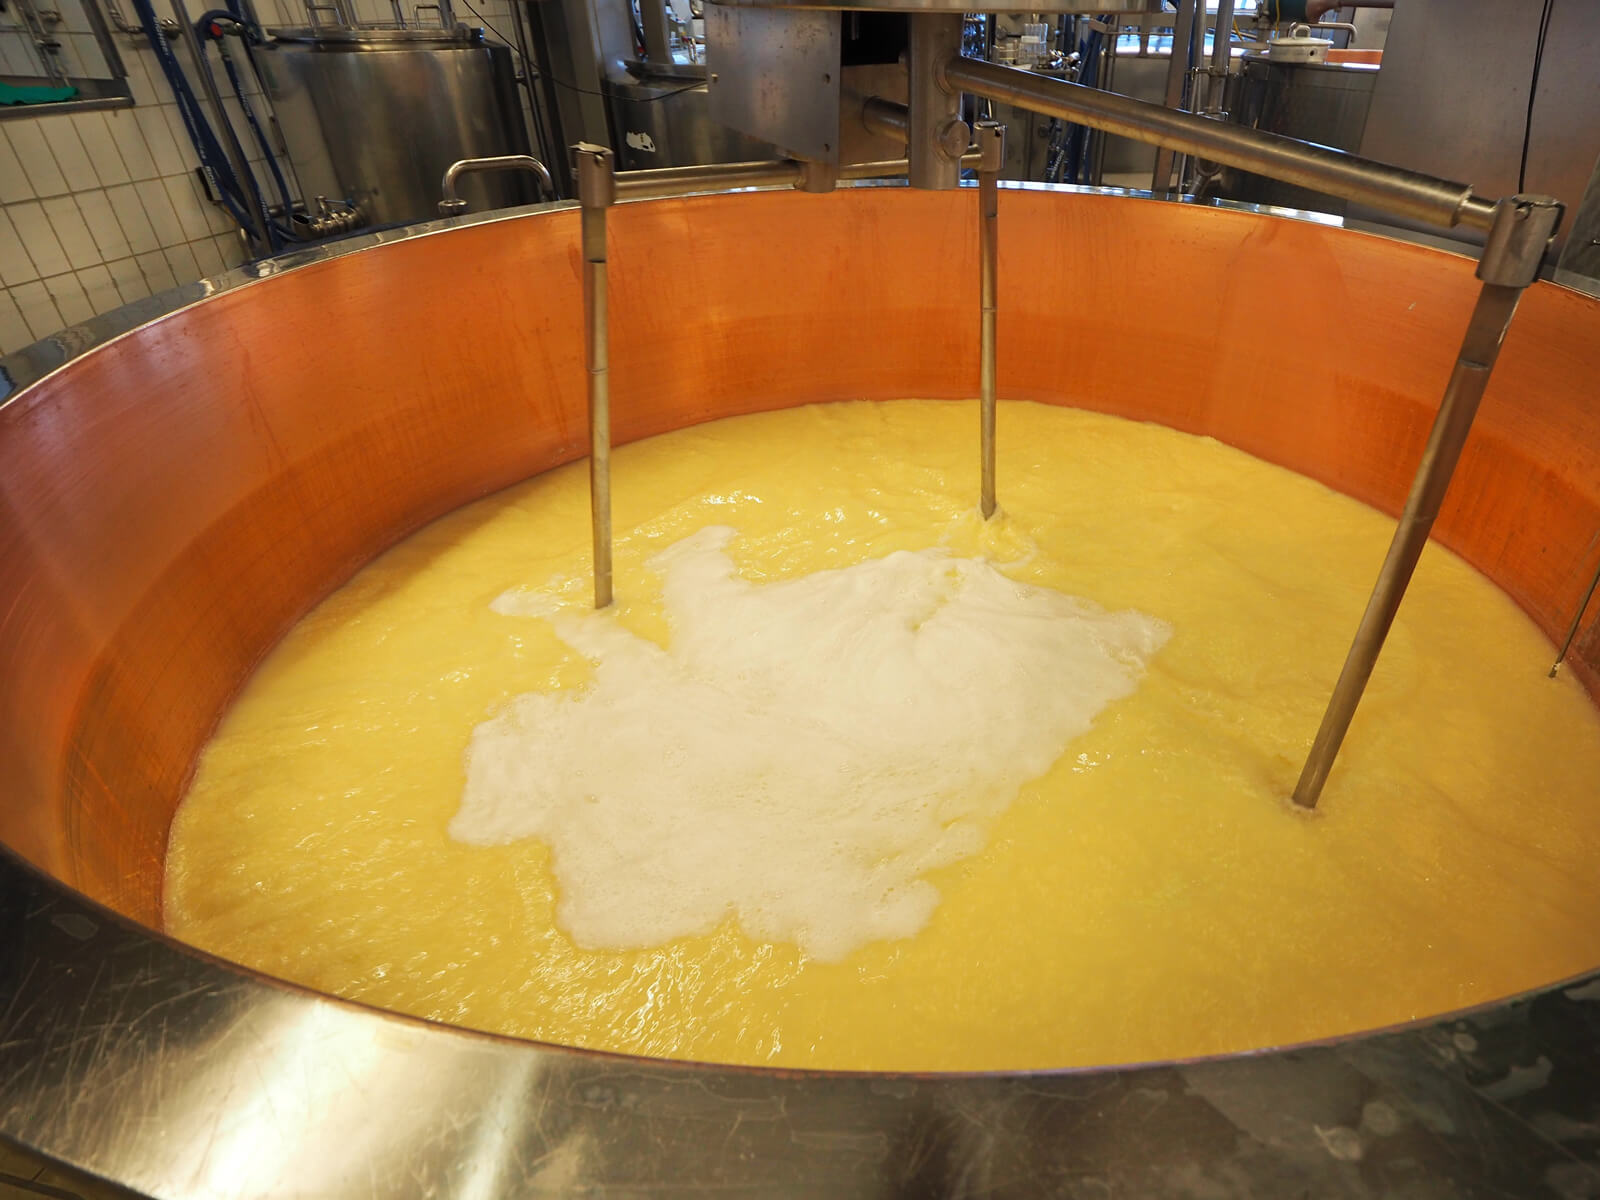 Milk is heated up in a large container at the Emmental Cheese Village